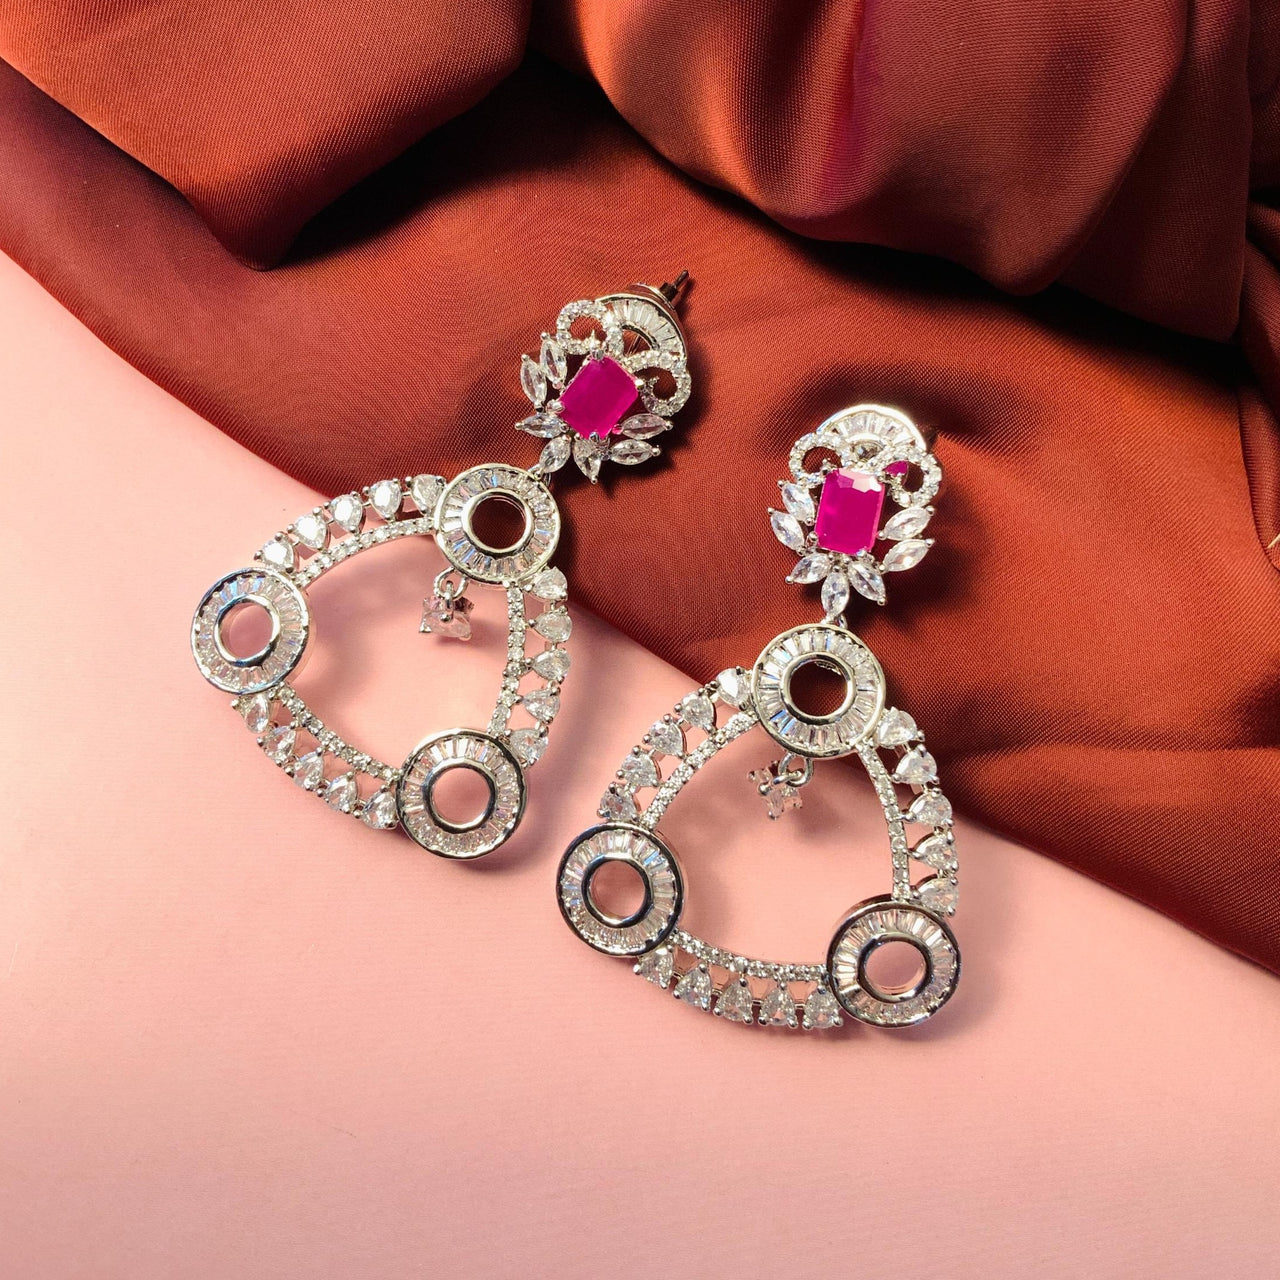 Gold Oxidised Pink Stone Earrings GiftSend Jewellery Gifts Online  L11029087 IGPcom